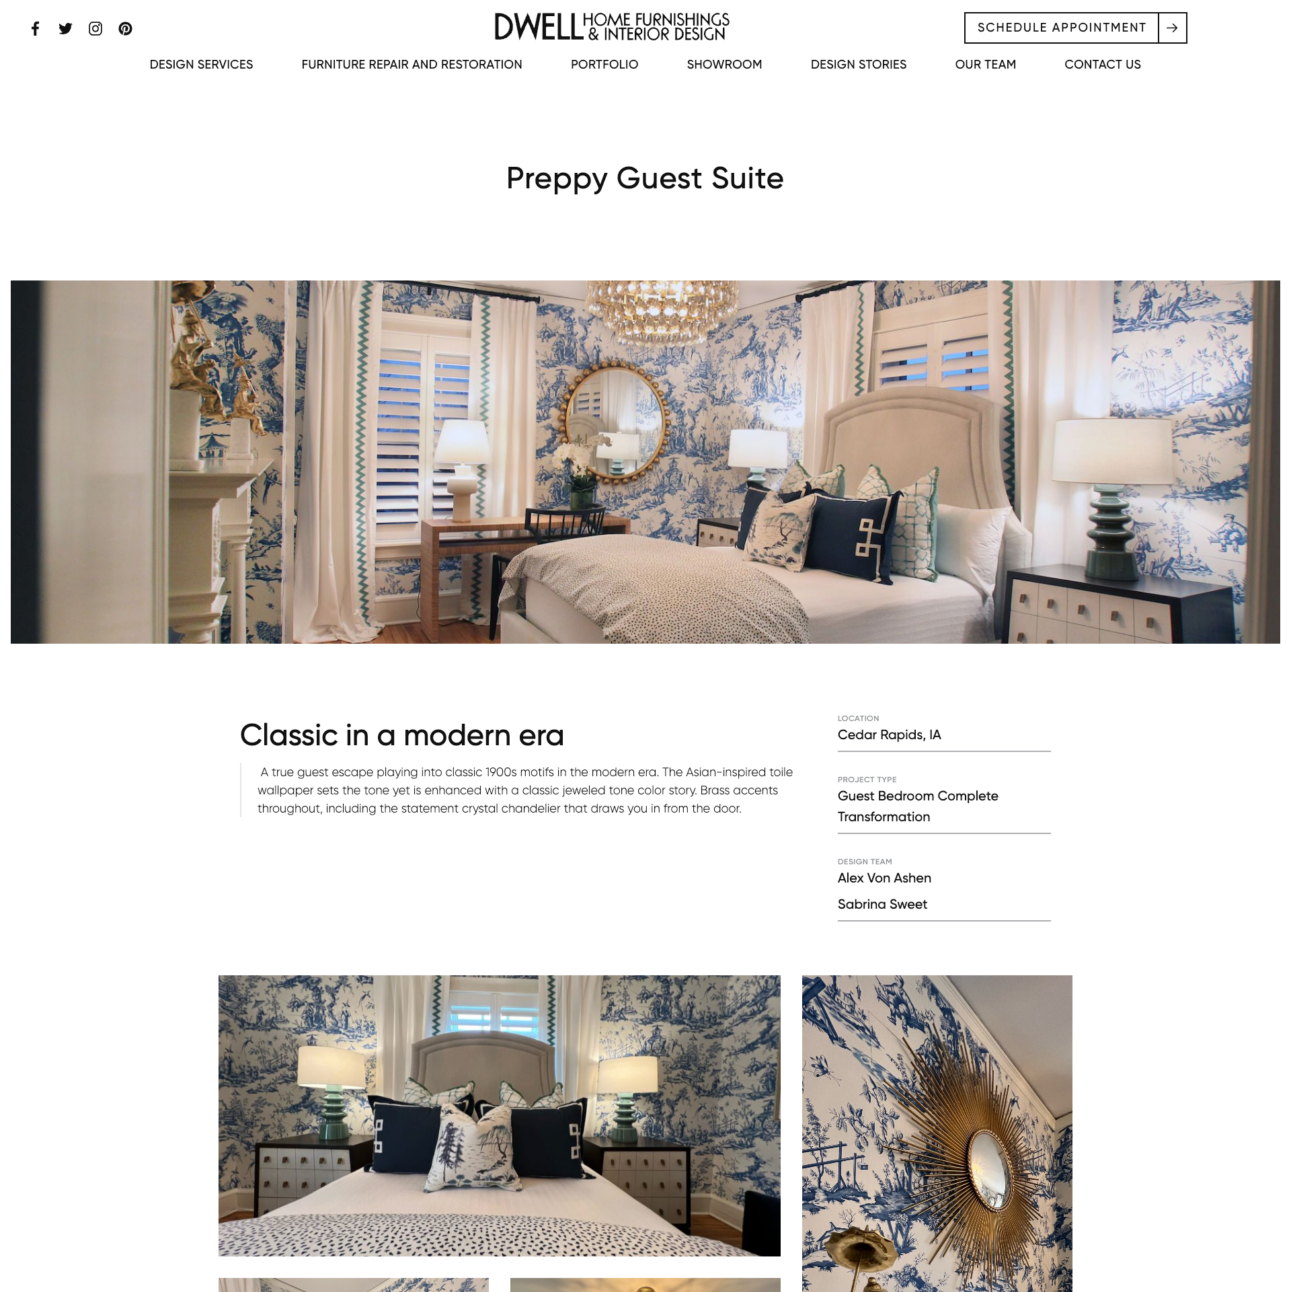 dwell home furnishings and interior design project page